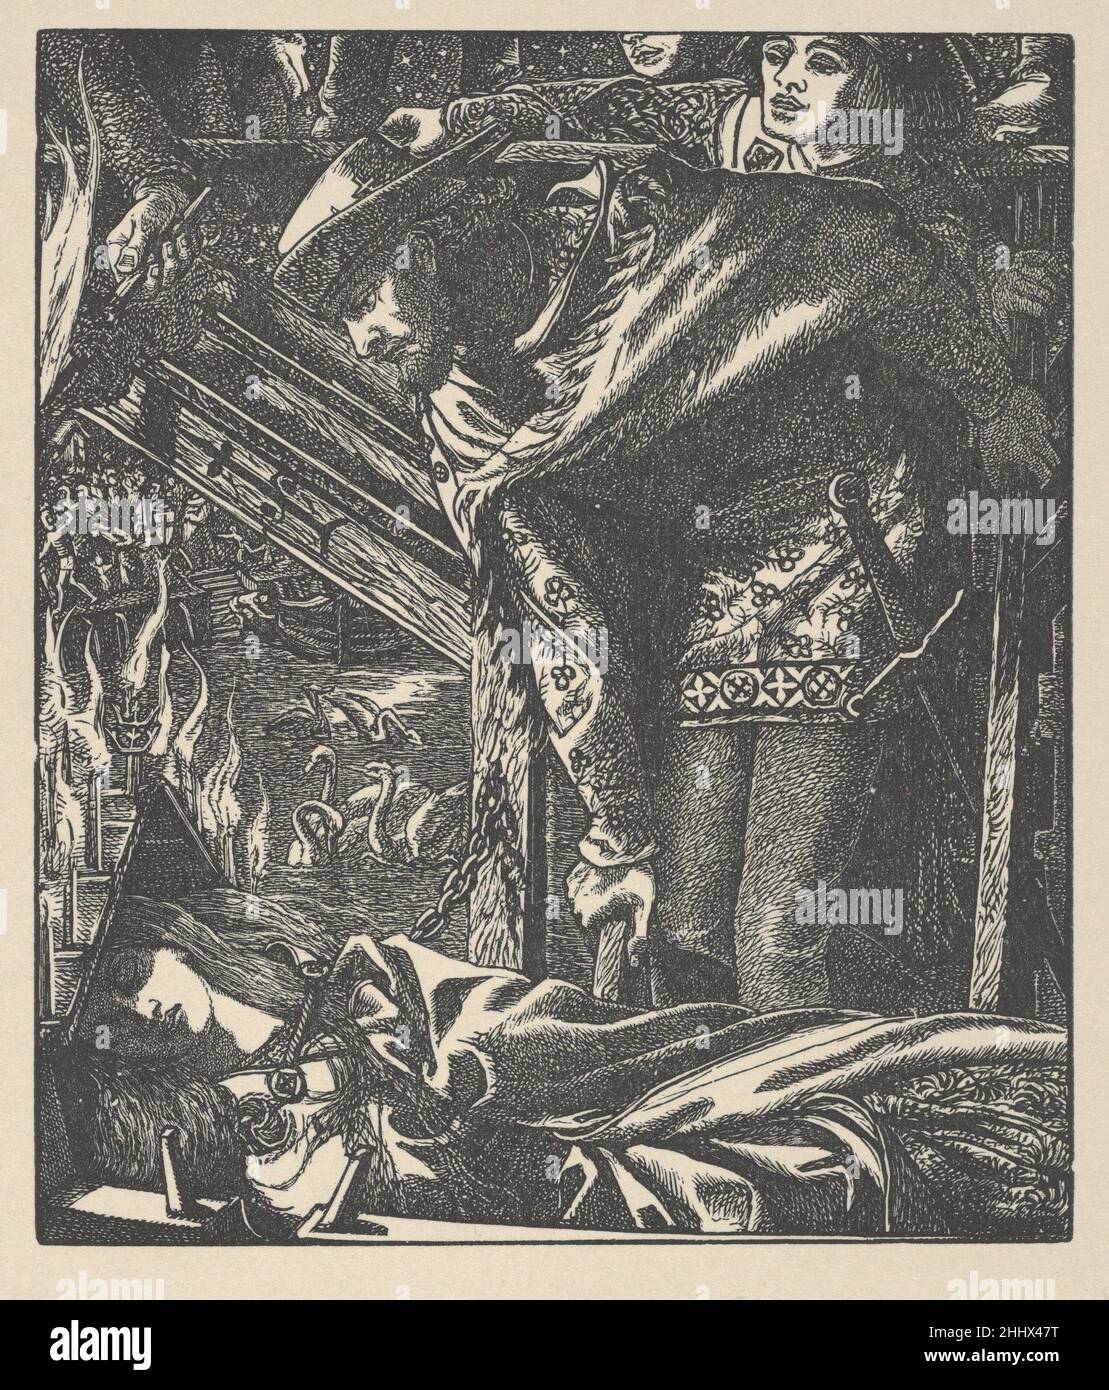 The Lady of Shalott (from Tennyson's Poems, New York, 1903) 1857–1903 After Dante Gabriel Rossetti British Rossetti’s 1857 illustrations of Tennyson—reissued here in 1903—incorporate startling effects derived from medieval and early Renaissance art. Space collapses, forms are cut off, and narrative details are inserted without concern for conventional perspective. The Lady of Shalott is a night scene dramatized by flaming candles and set on the river below Camelot. Rossetti criticized the engravers and insisted on many changes, delaying the publication.. The Lady of Shalott (from Tennyson's Po Stock Photo